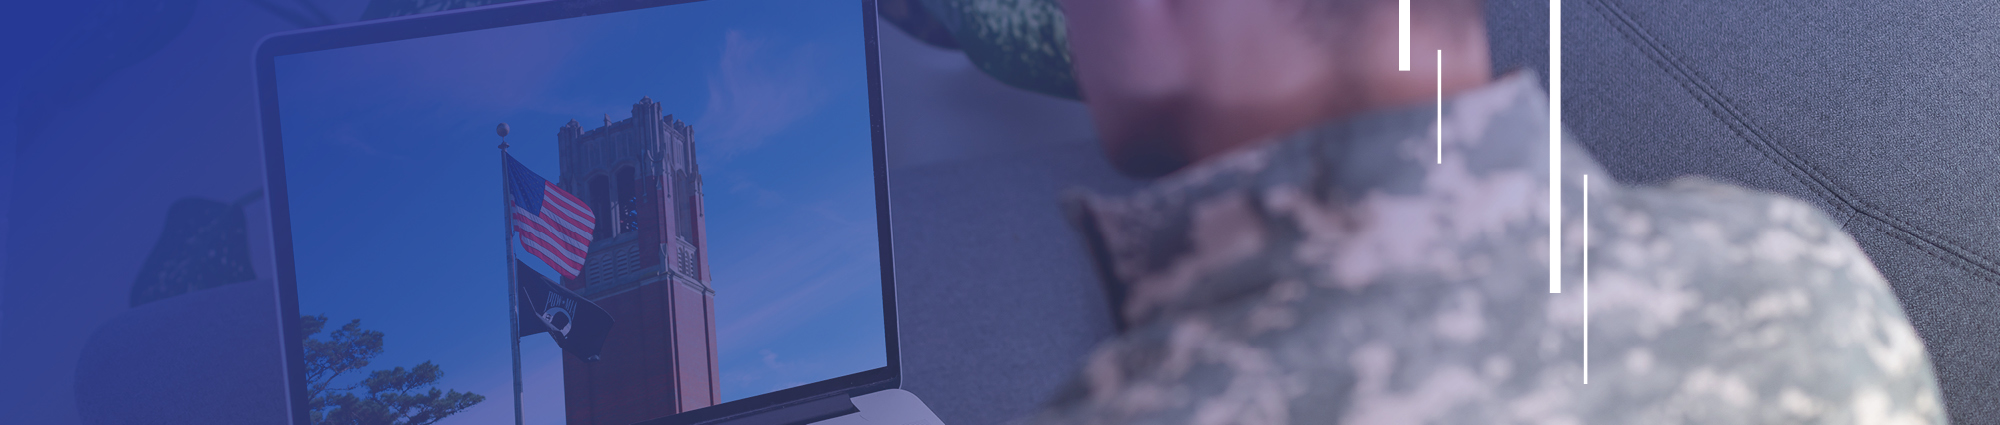 Banner background of person in military attire looking at a laptop